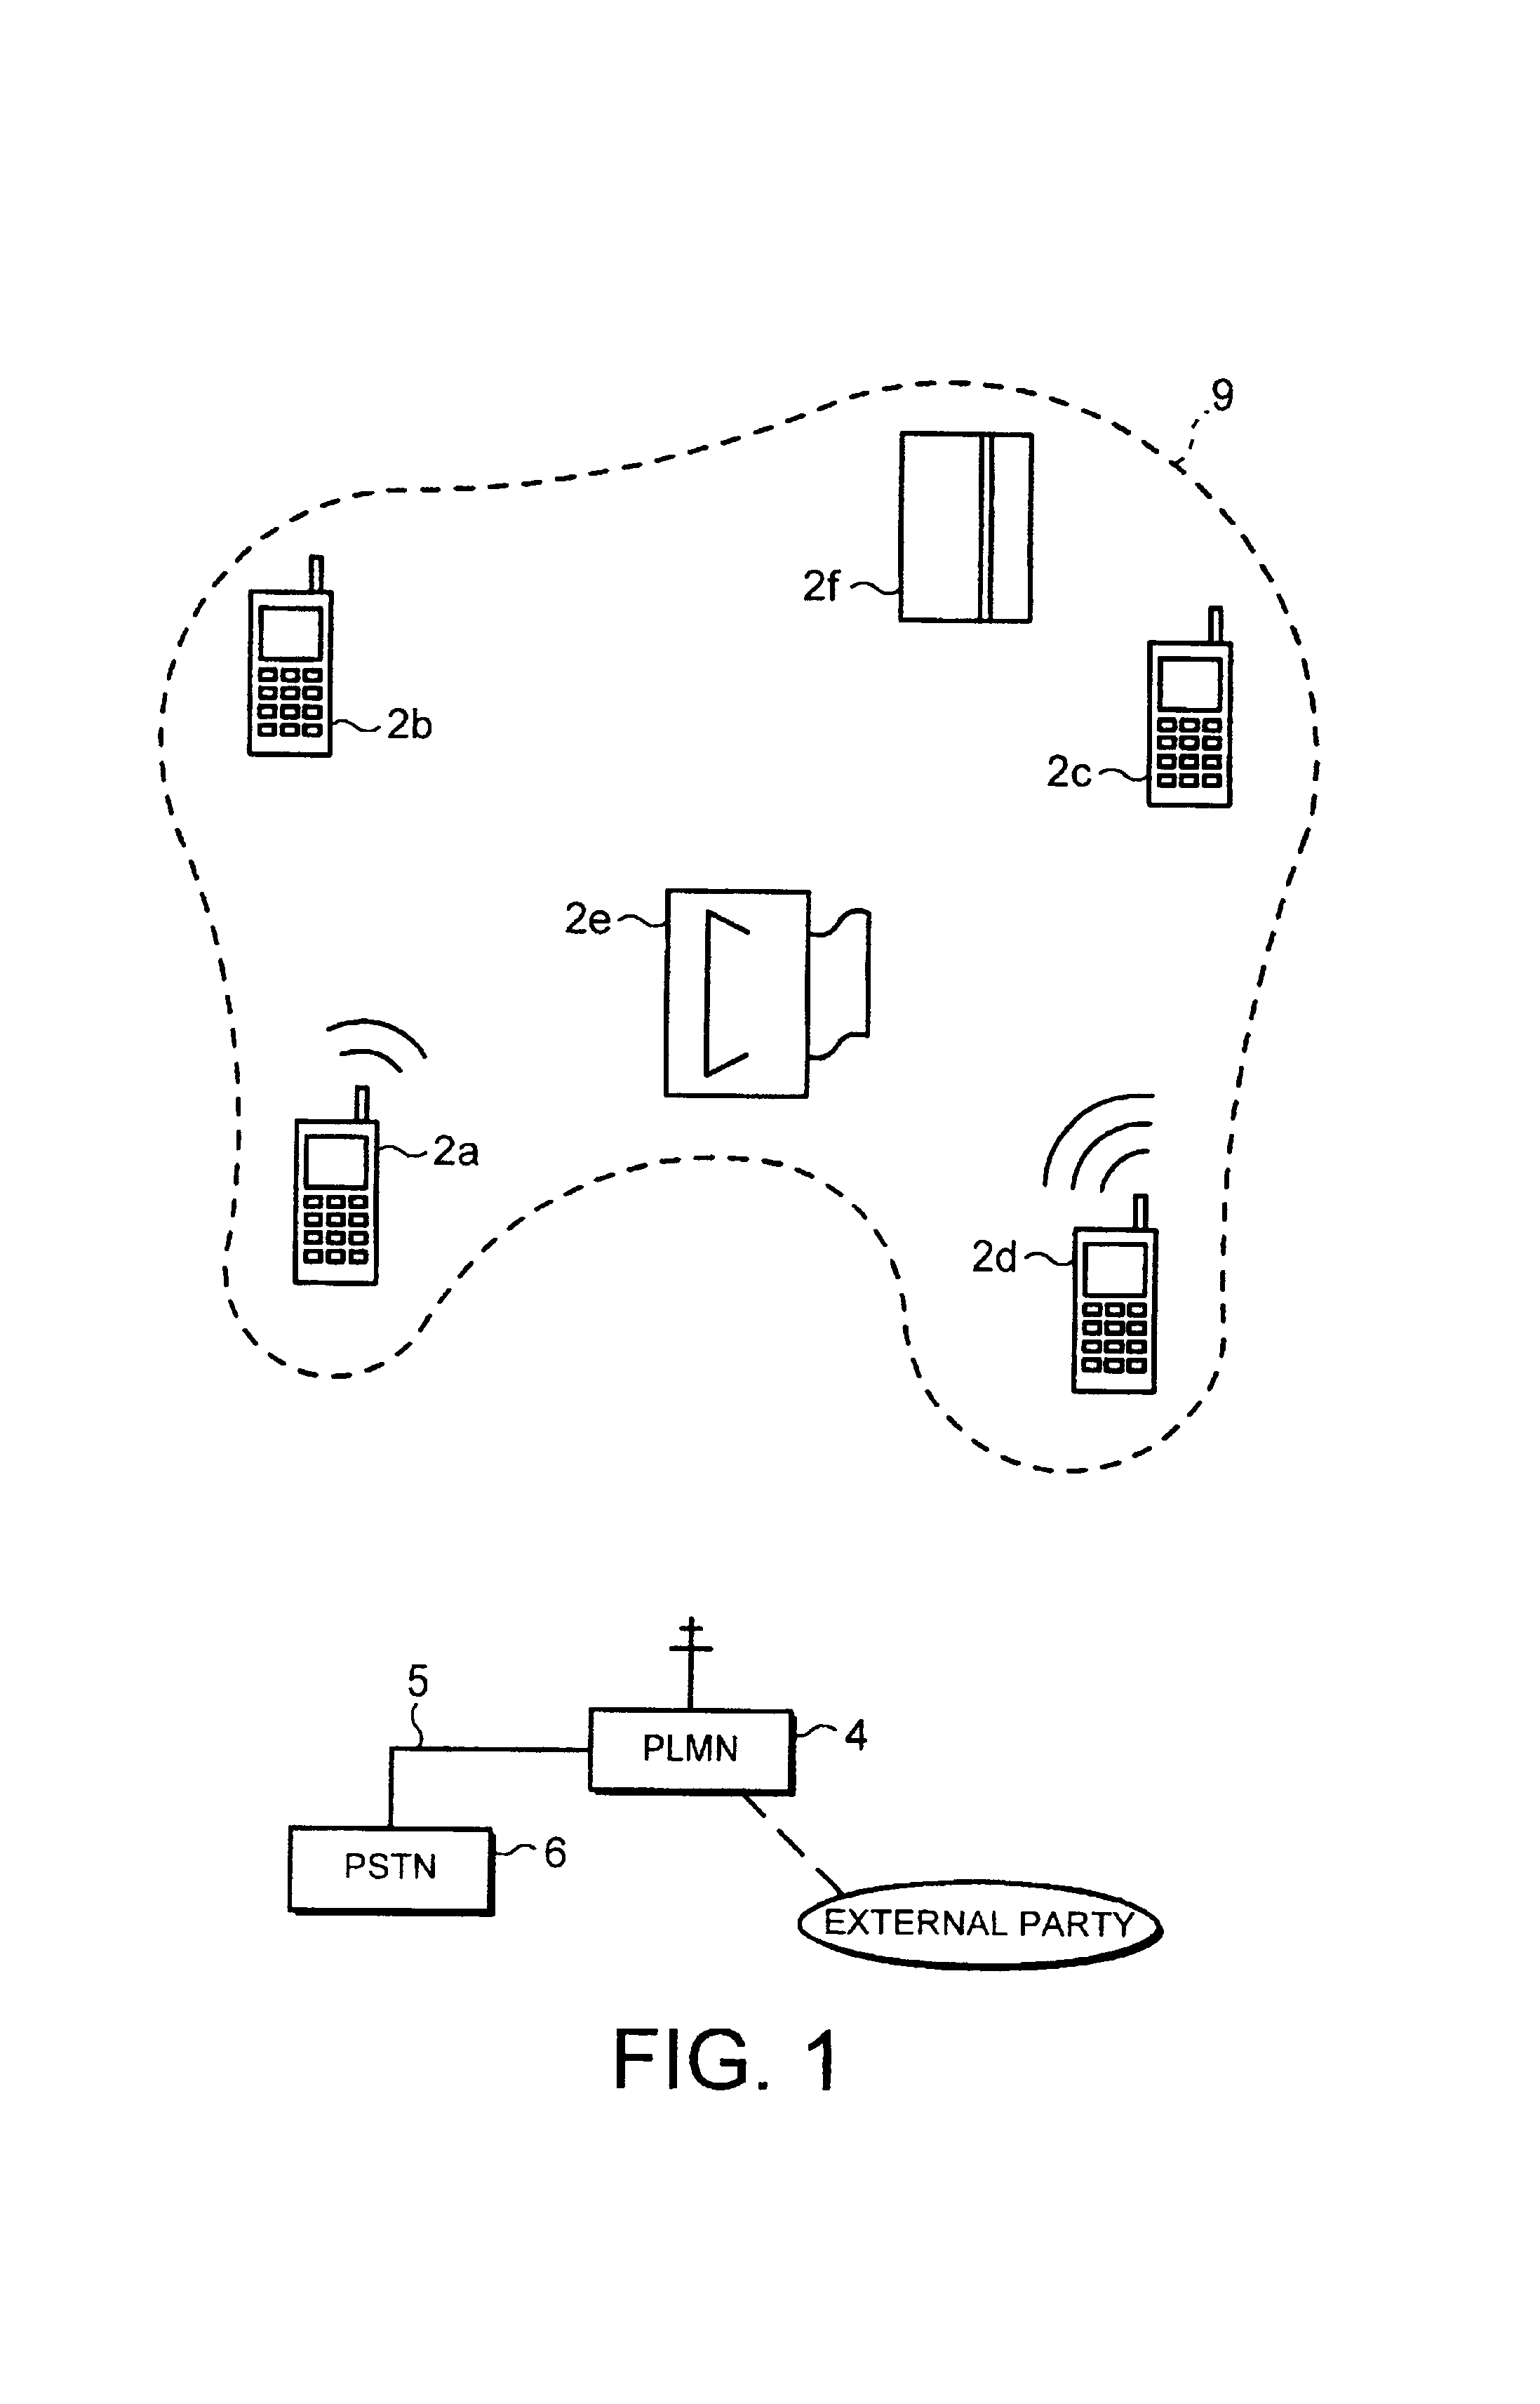 Conference call method and apparatus therefor